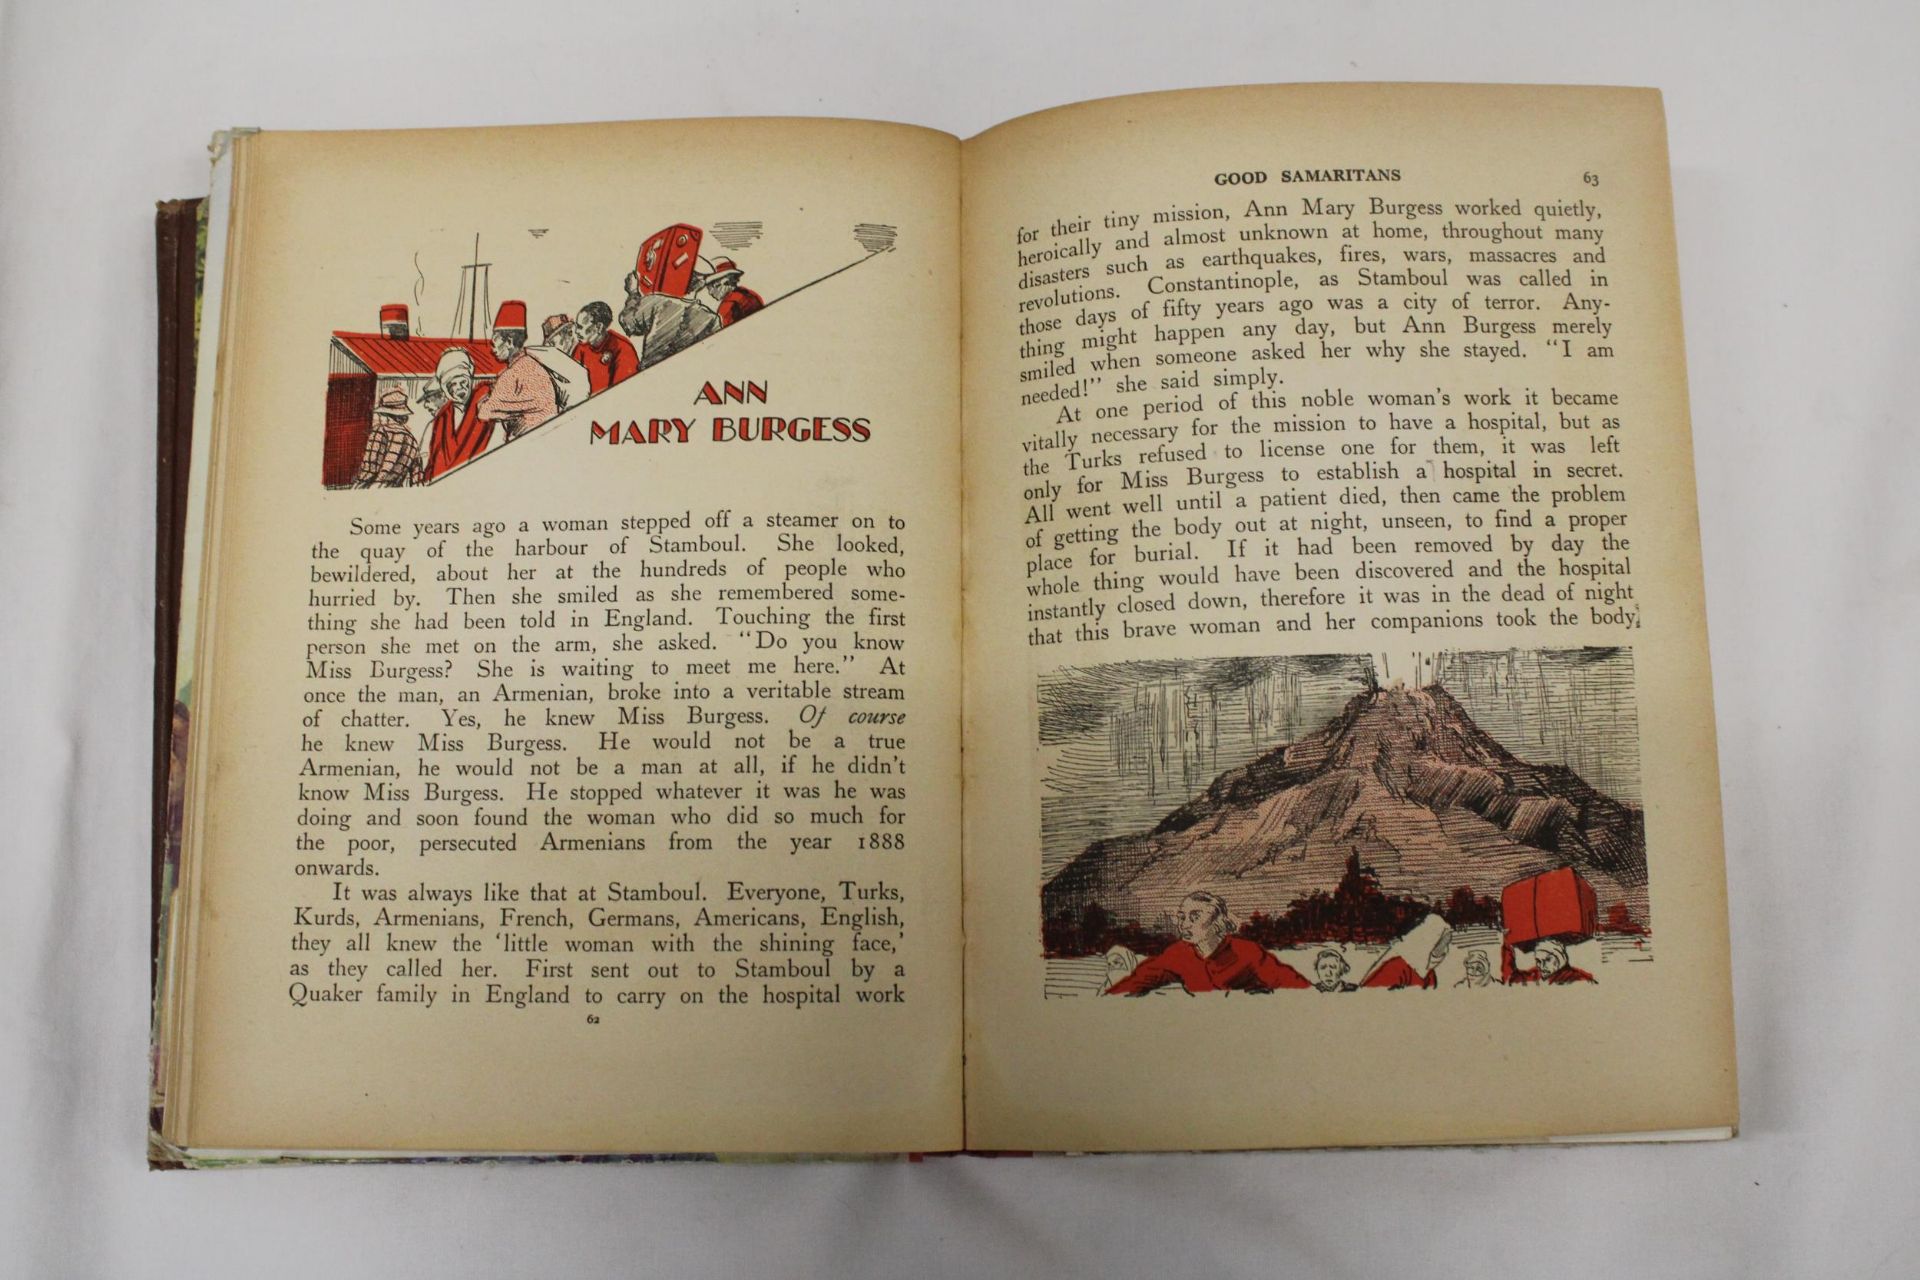 TWO VINTAGE HARDBACK CHILDREN'S BOOKS, 'THE GIRL'S BOOK OF HEROINES' AND 'LAMB'S TALES FROM - Image 8 of 8